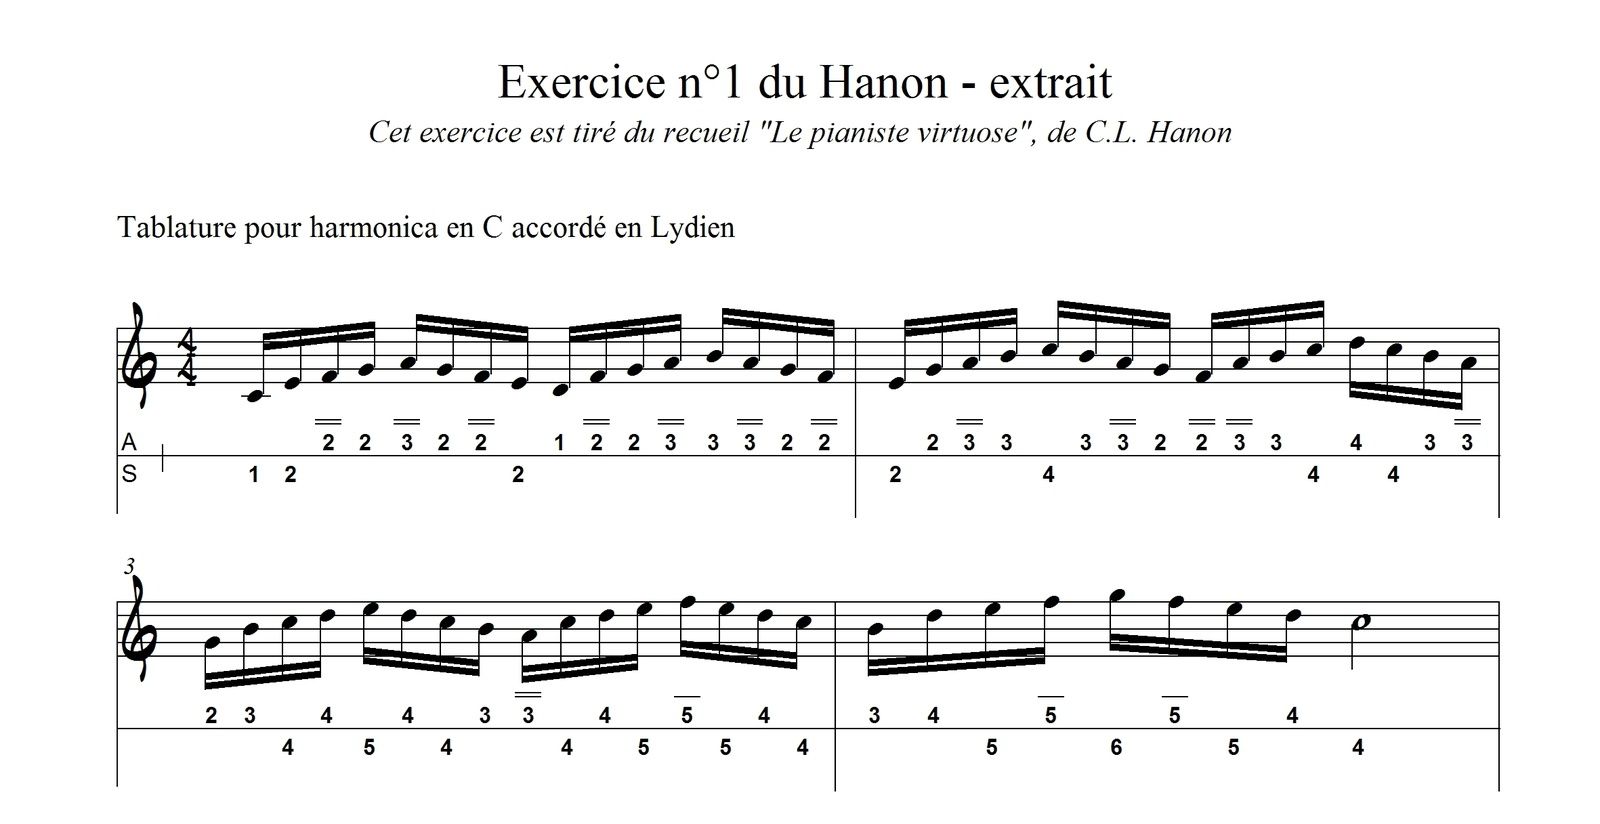 Exercice n°1 du Hanon - www.TheOverblowers.com